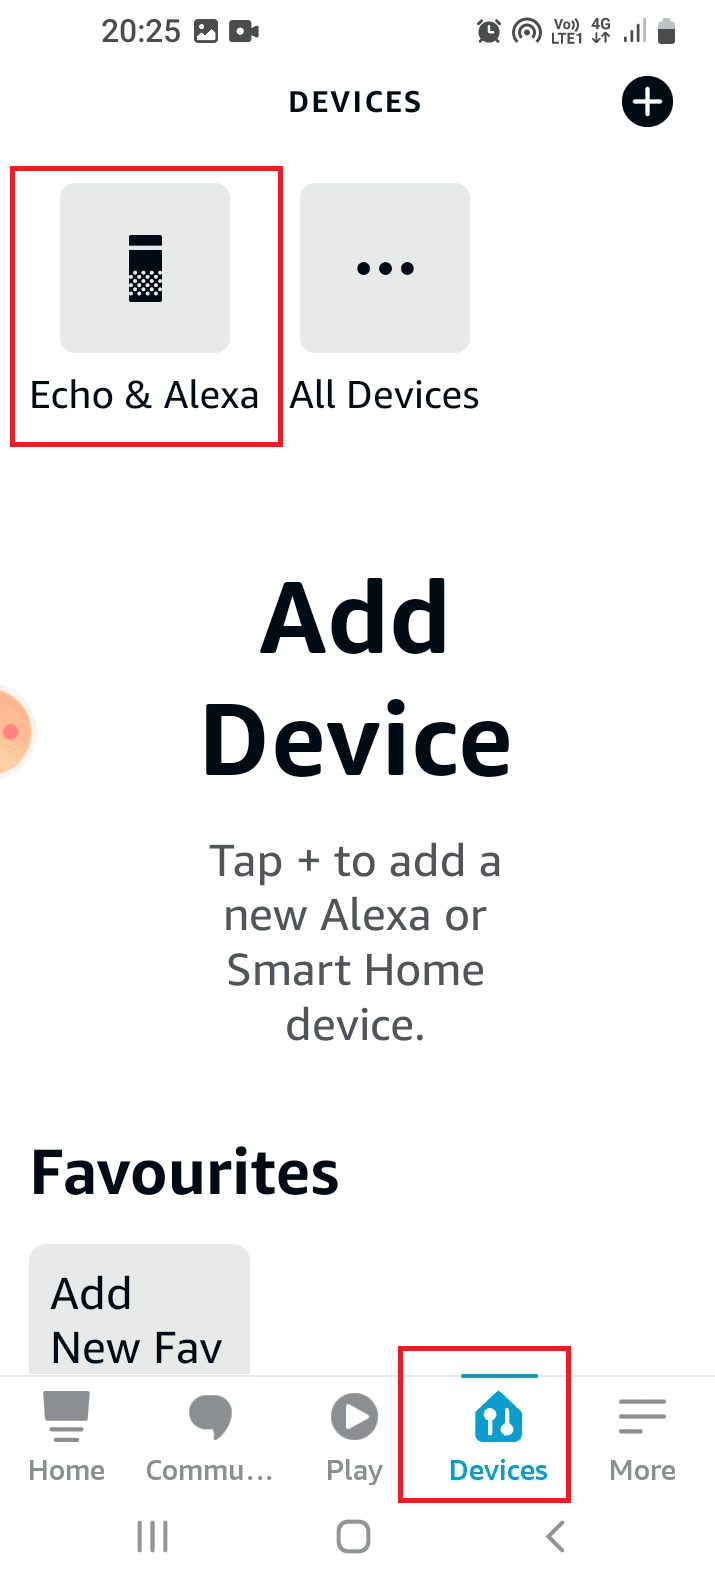 Move to the Devices tab and tap on the Echo and Alexa option